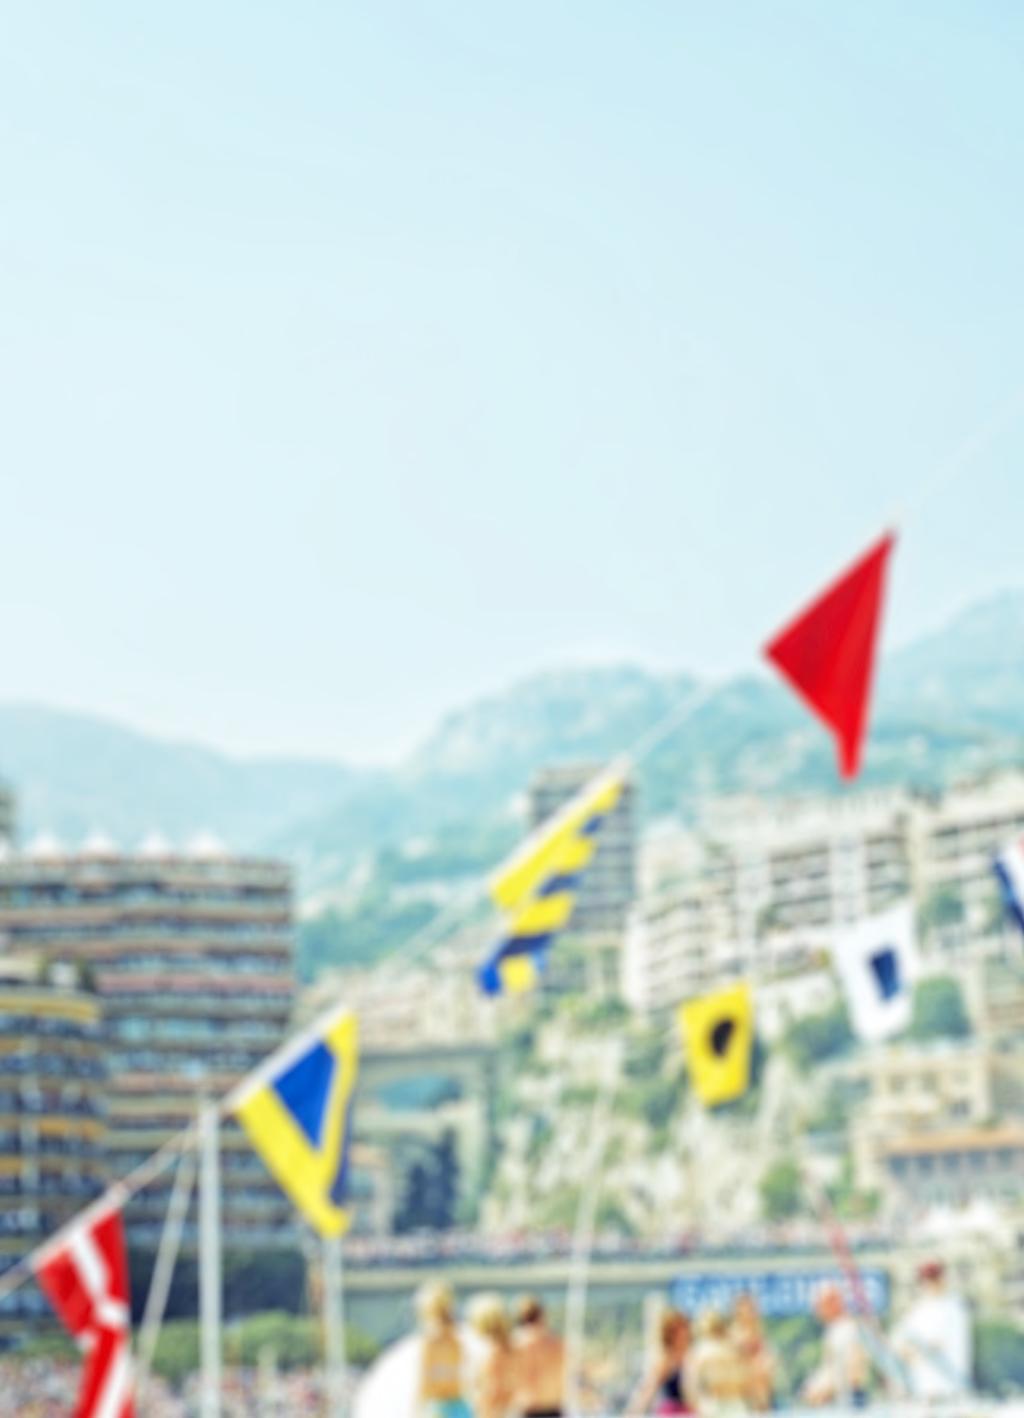 MONACO GRAND PRIX ACCOMMODATION & DINING PACKAGES 4 NIGHTS We recognise that any true luxury travel experience demands bespoke customisation to suit your individual preferences.